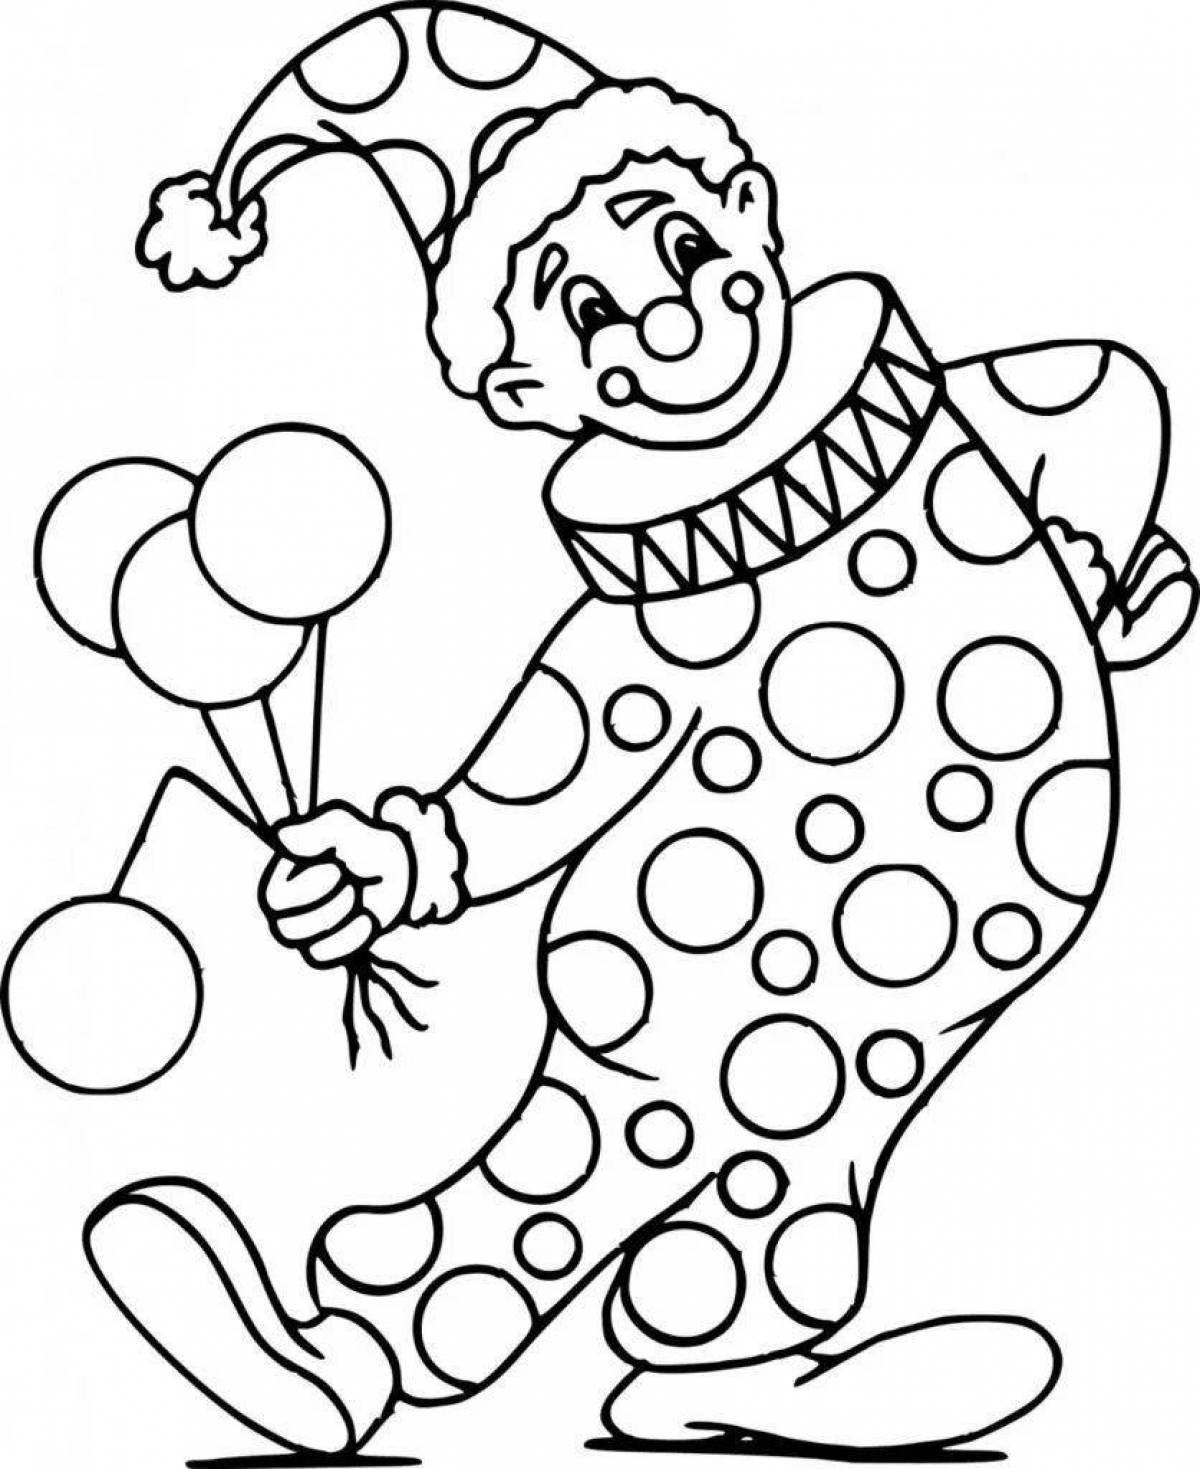 Adorable parsley coloring book for 3-4 year olds